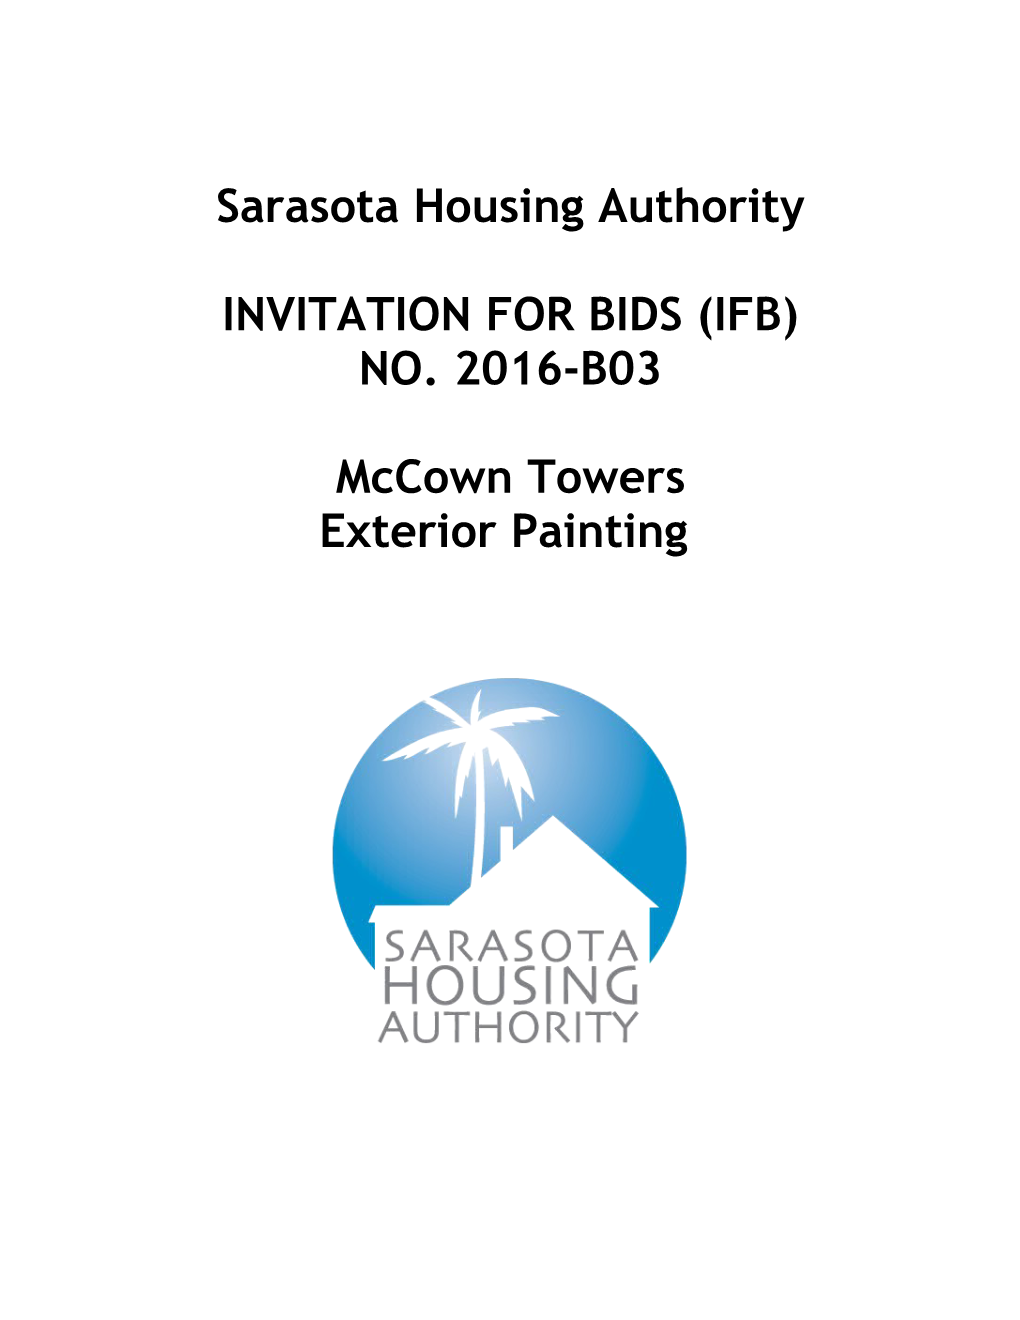 INVITATION for BIDS (IFB) No. 2016-B03, Mccown Towers Exterior Painting